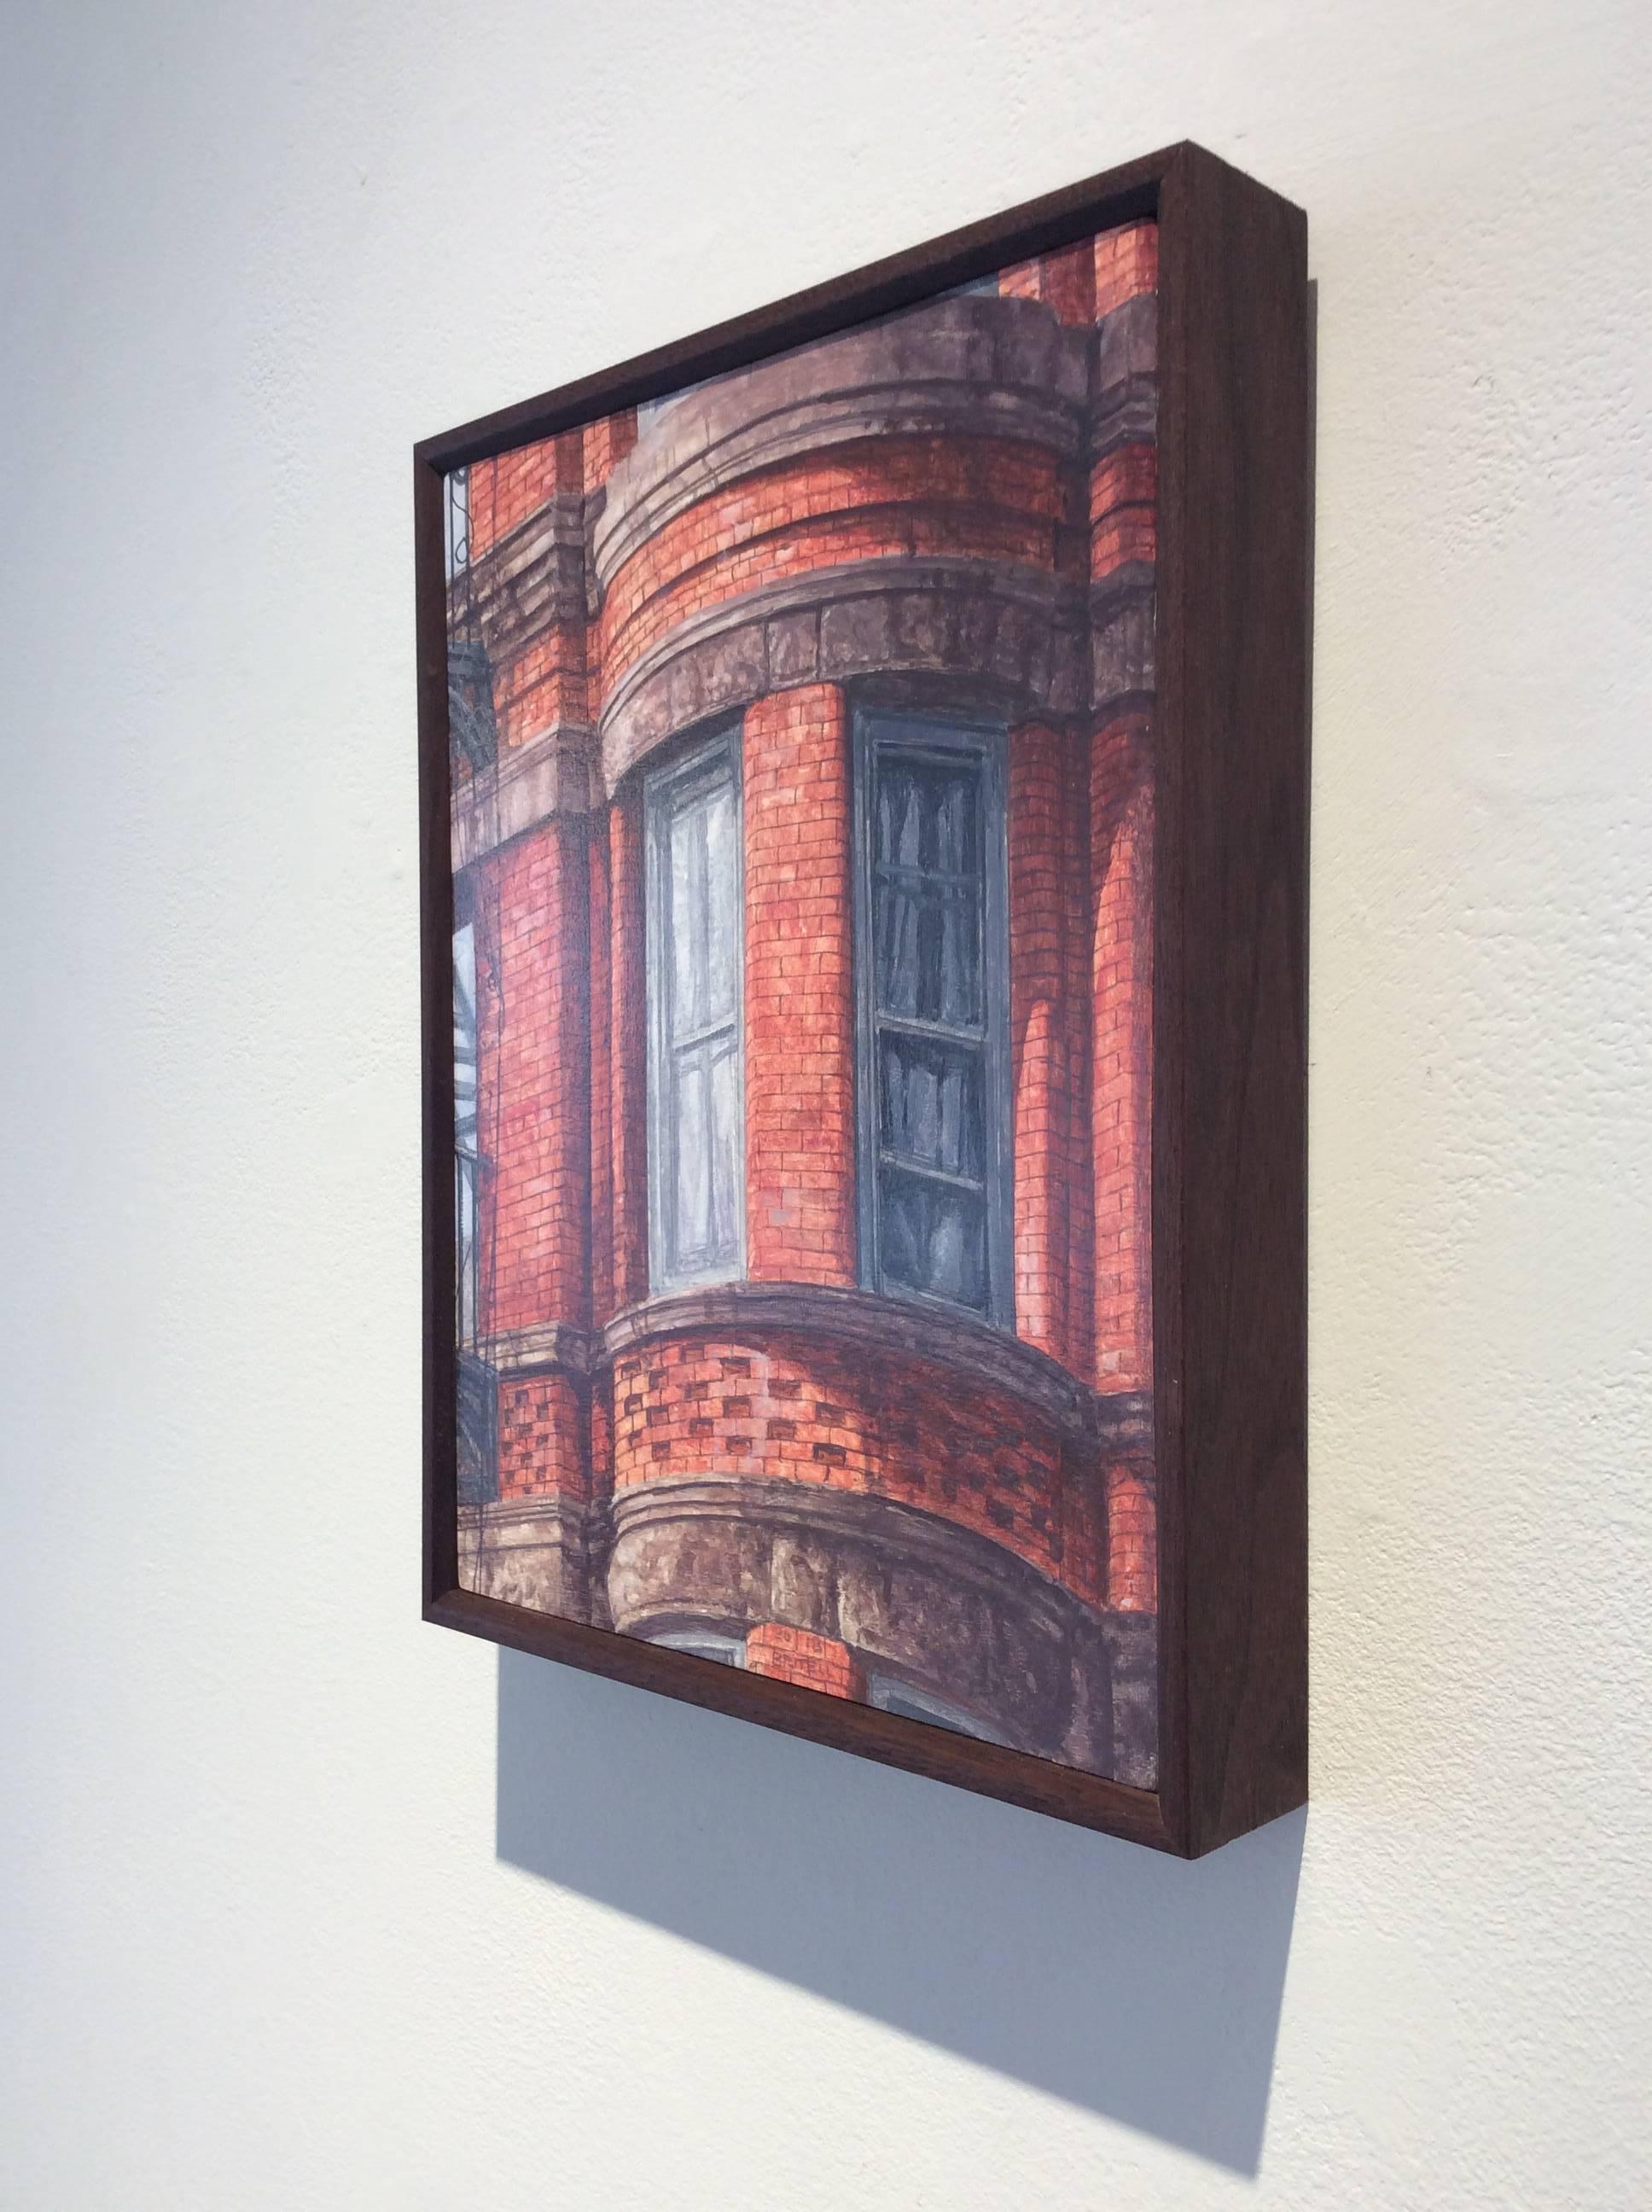 West Side Walk Up (Photo-Realist Still Life Painting of NYC Red Brick Building) 2